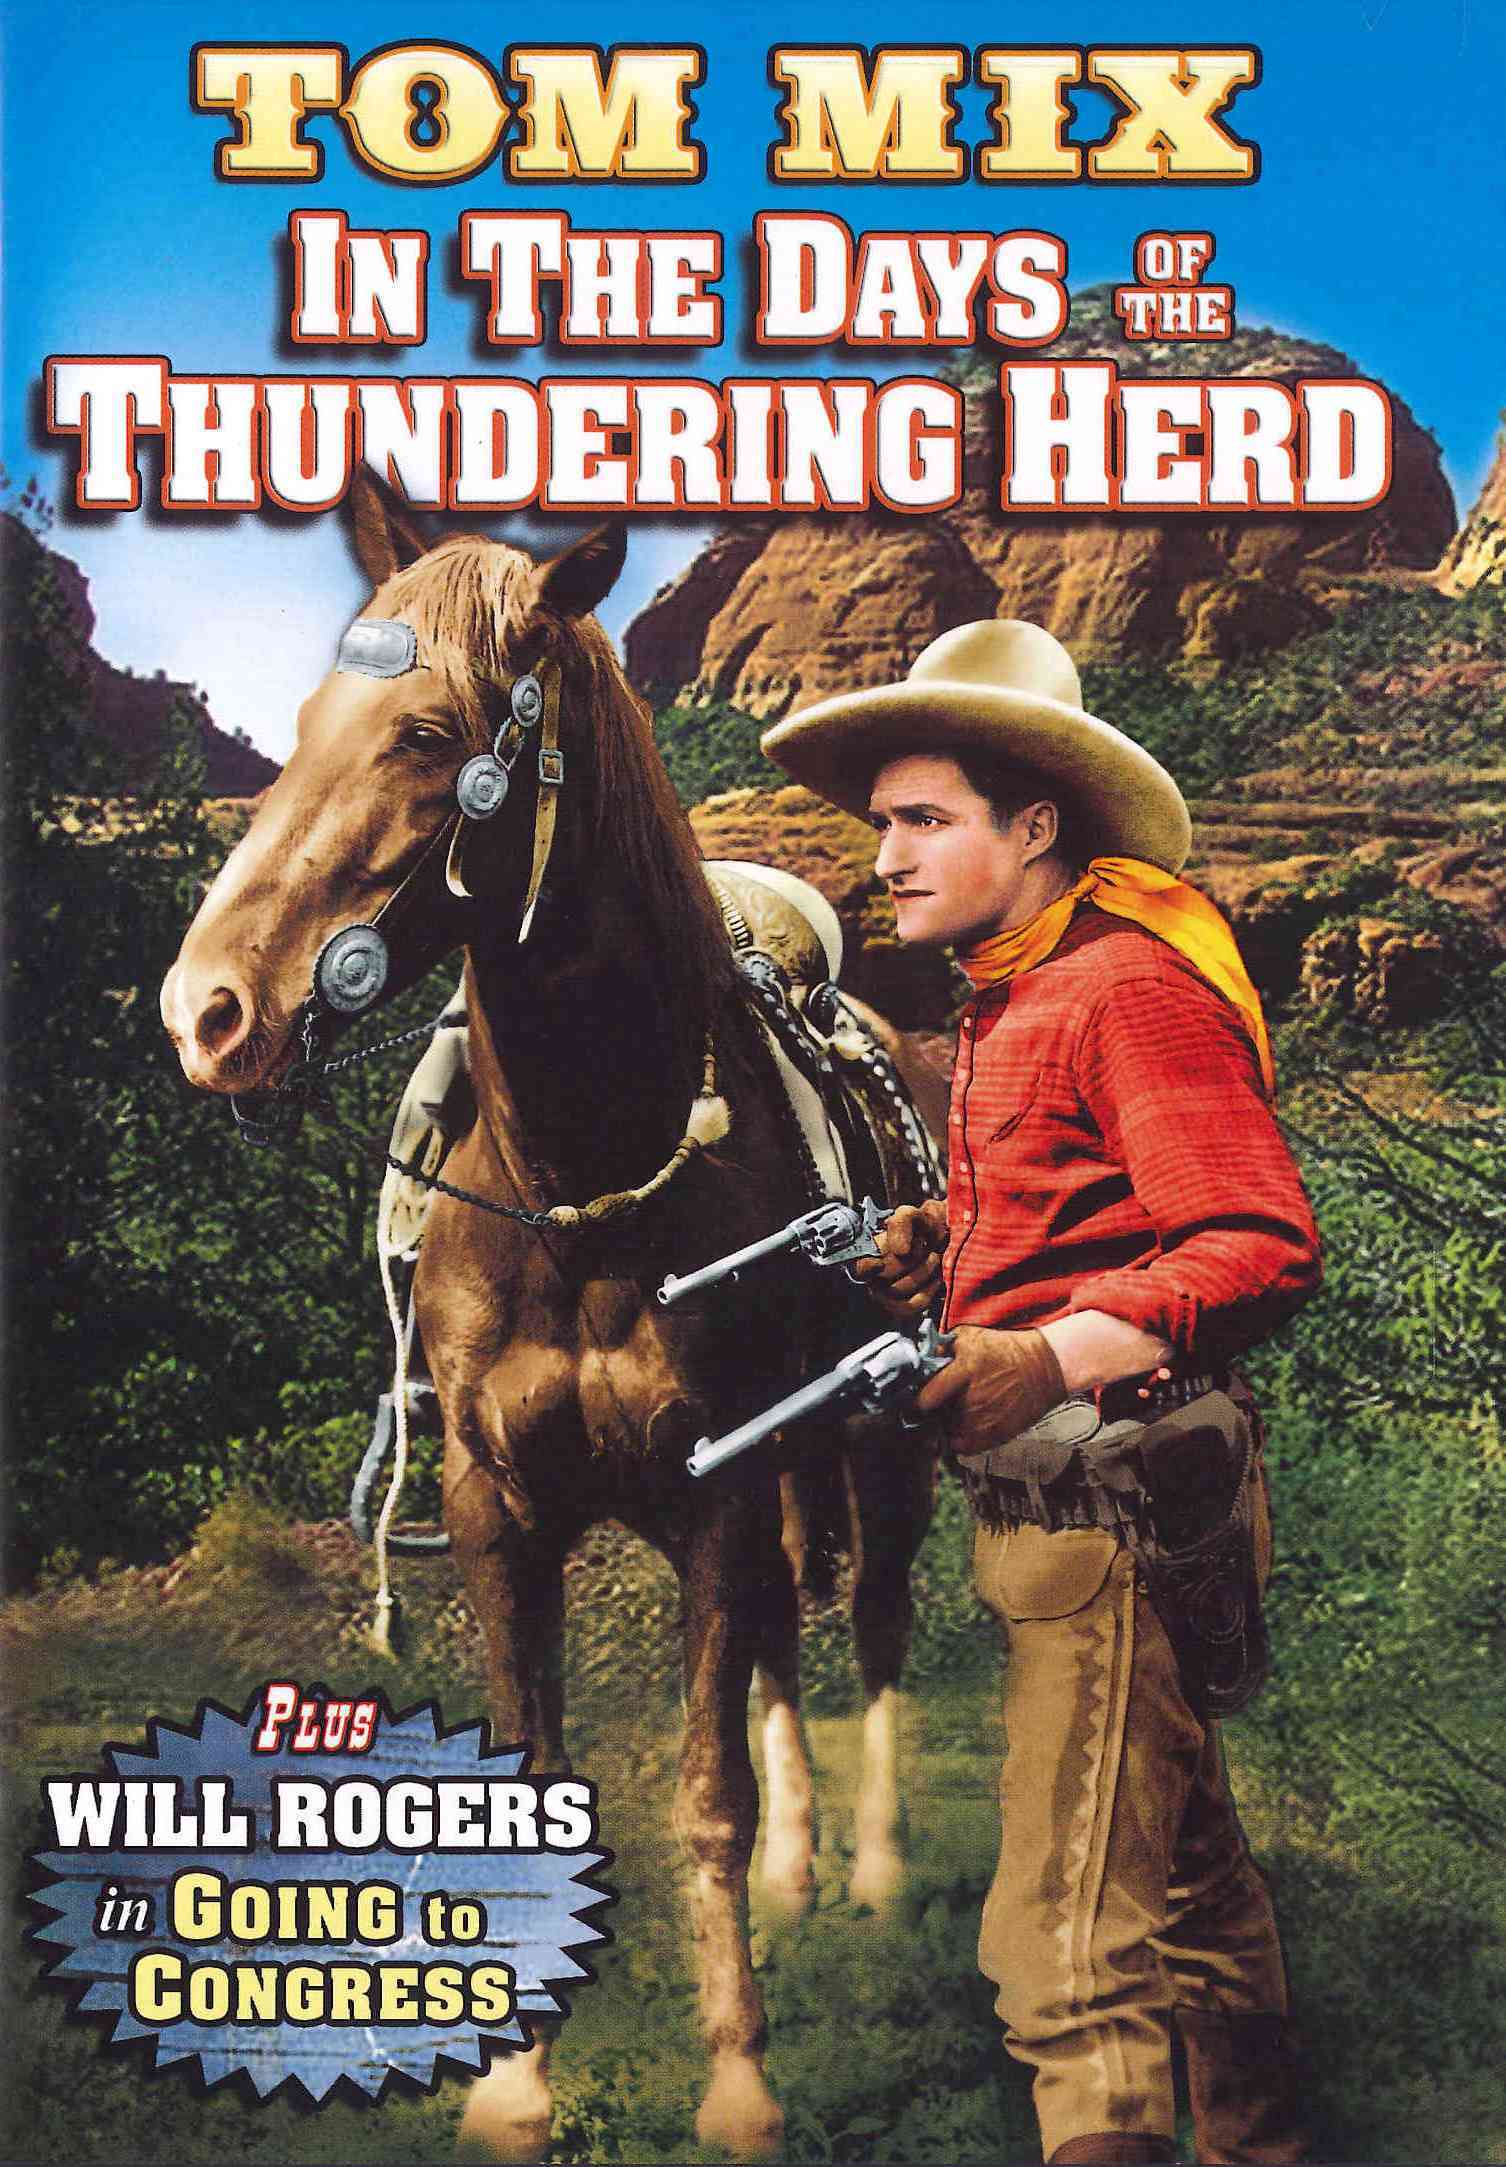 In the Days of the Thundering Herd cover art